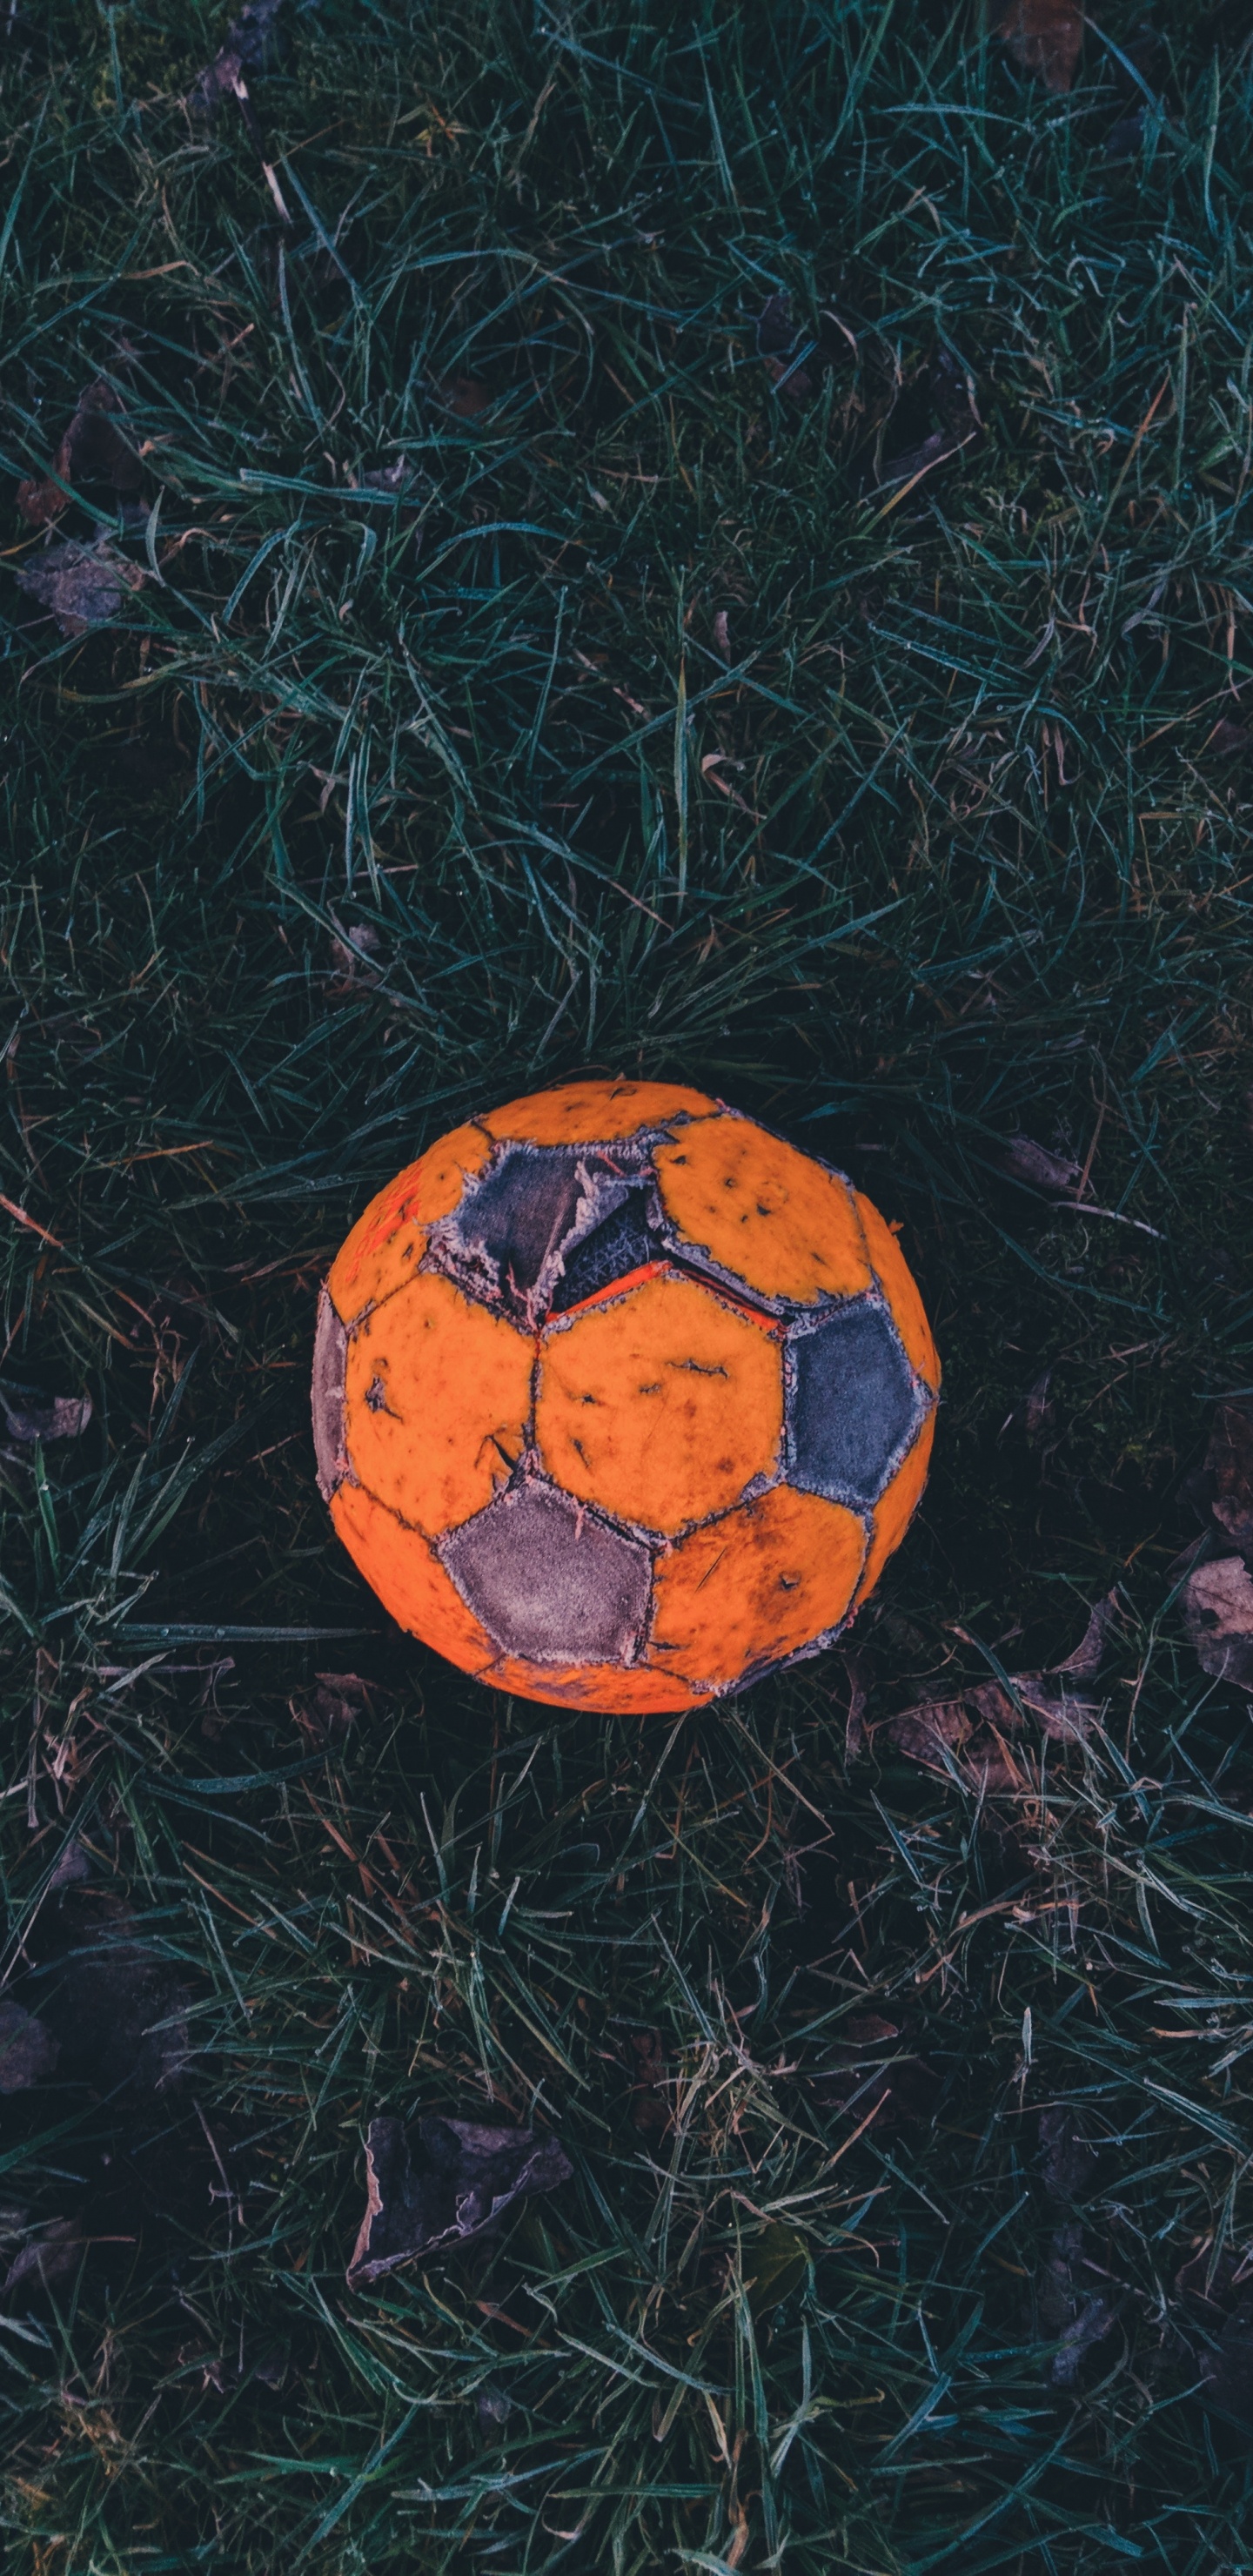 Orange and Black Soccer Ball on Green Grass. Wallpaper in 1440x2960 Resolution